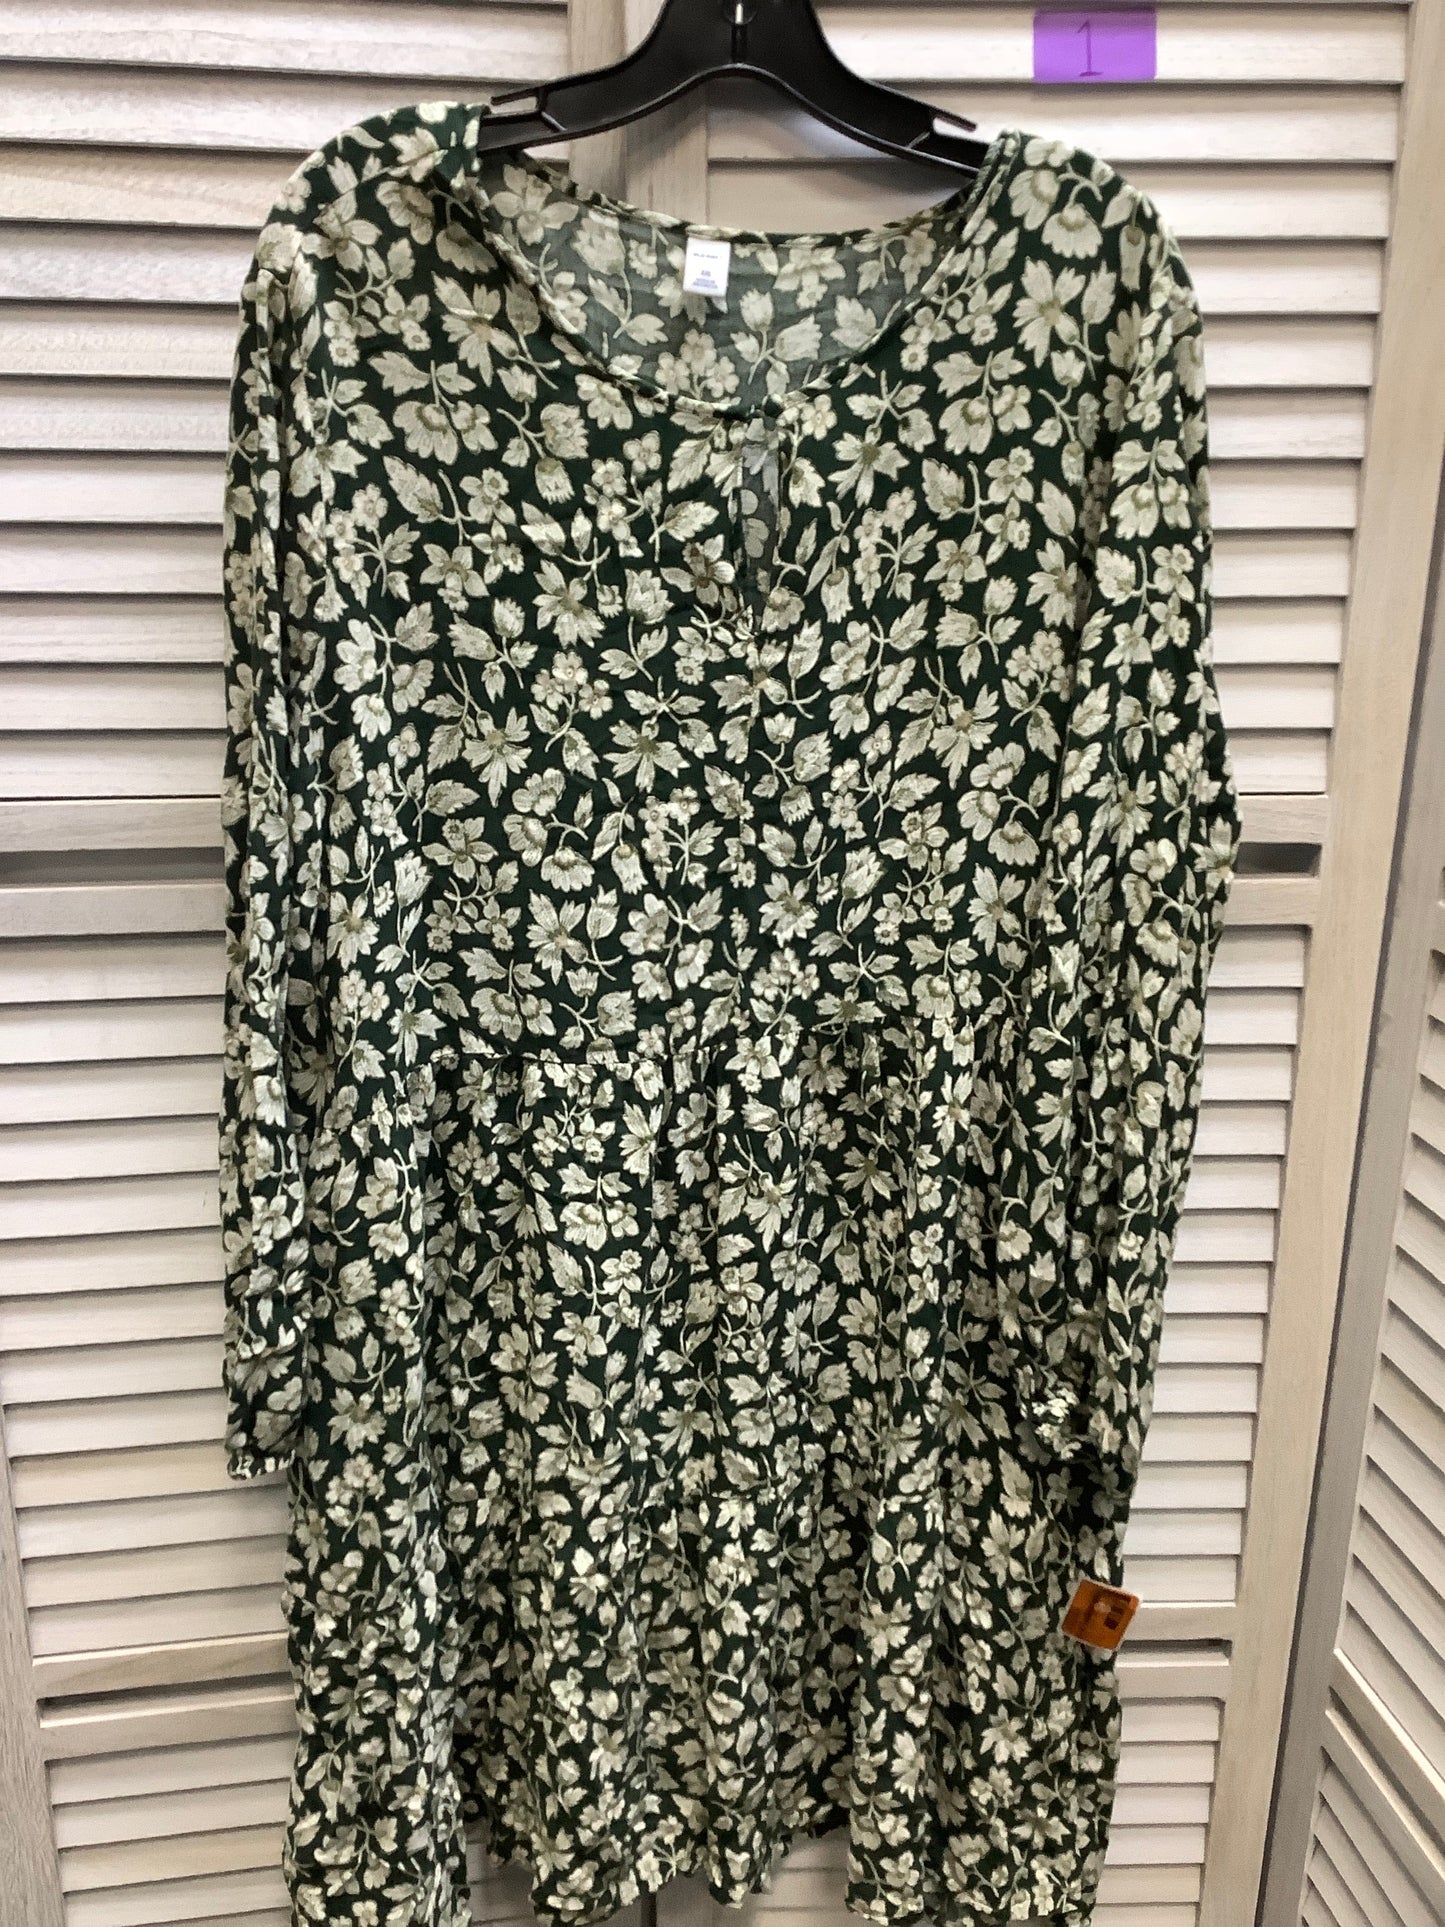 Floral Print Dress Casual Short Old Navy, Size 2x